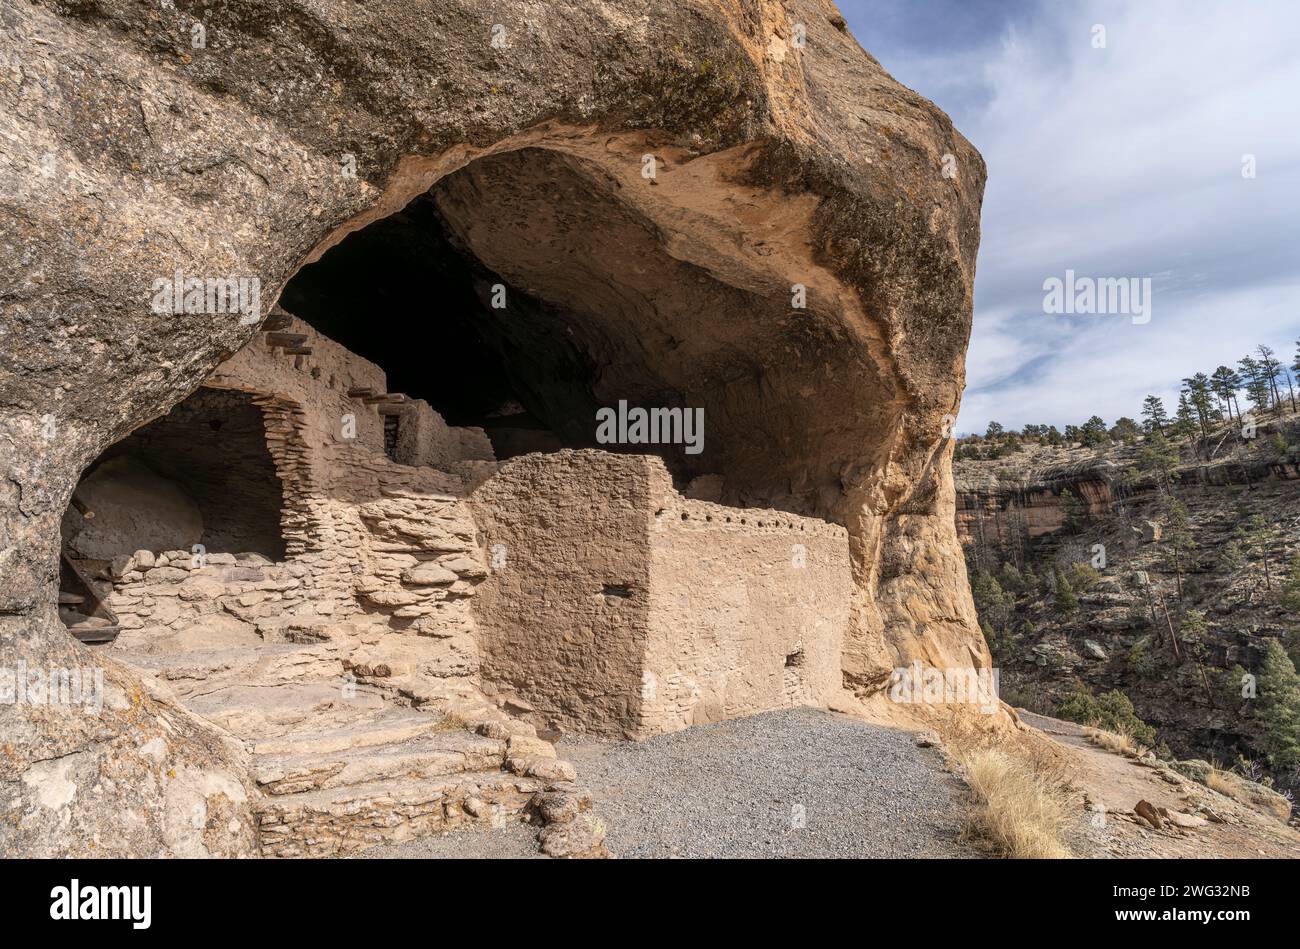 Mogollon structures at Gila Cliff Dwellings National Monument in New Mexico. Stock Photo